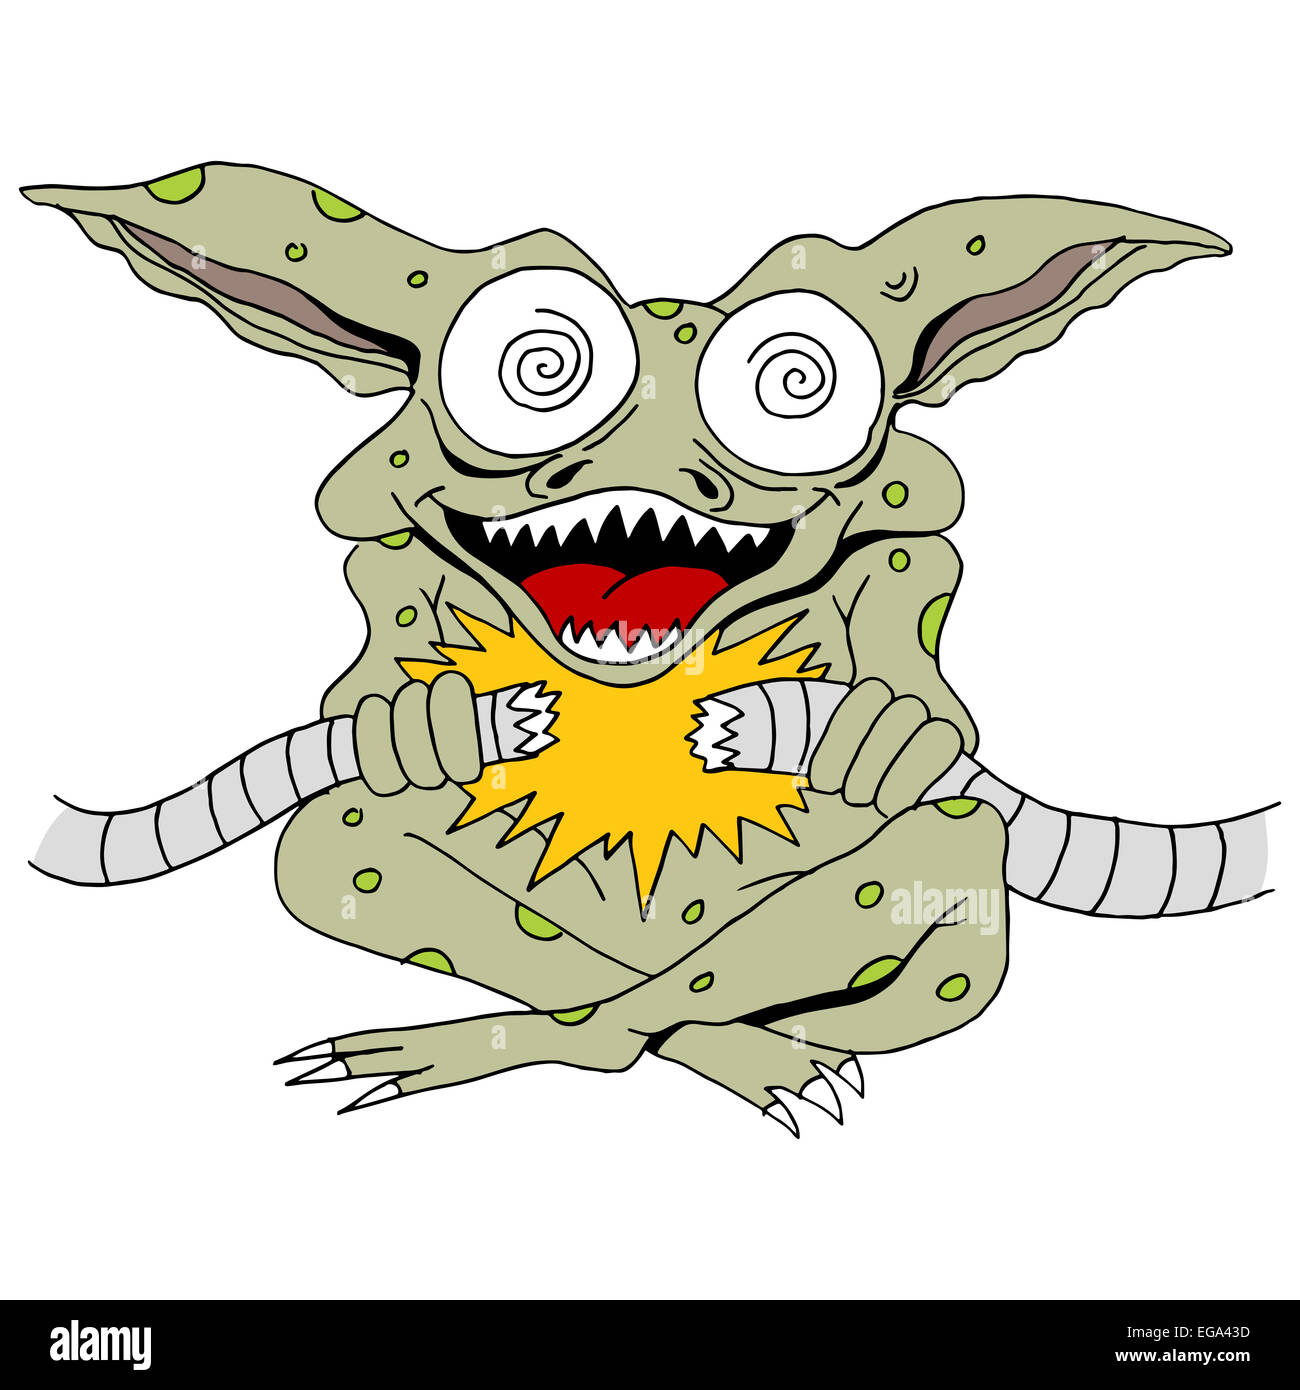 An image of a gremlin. Stock Photo